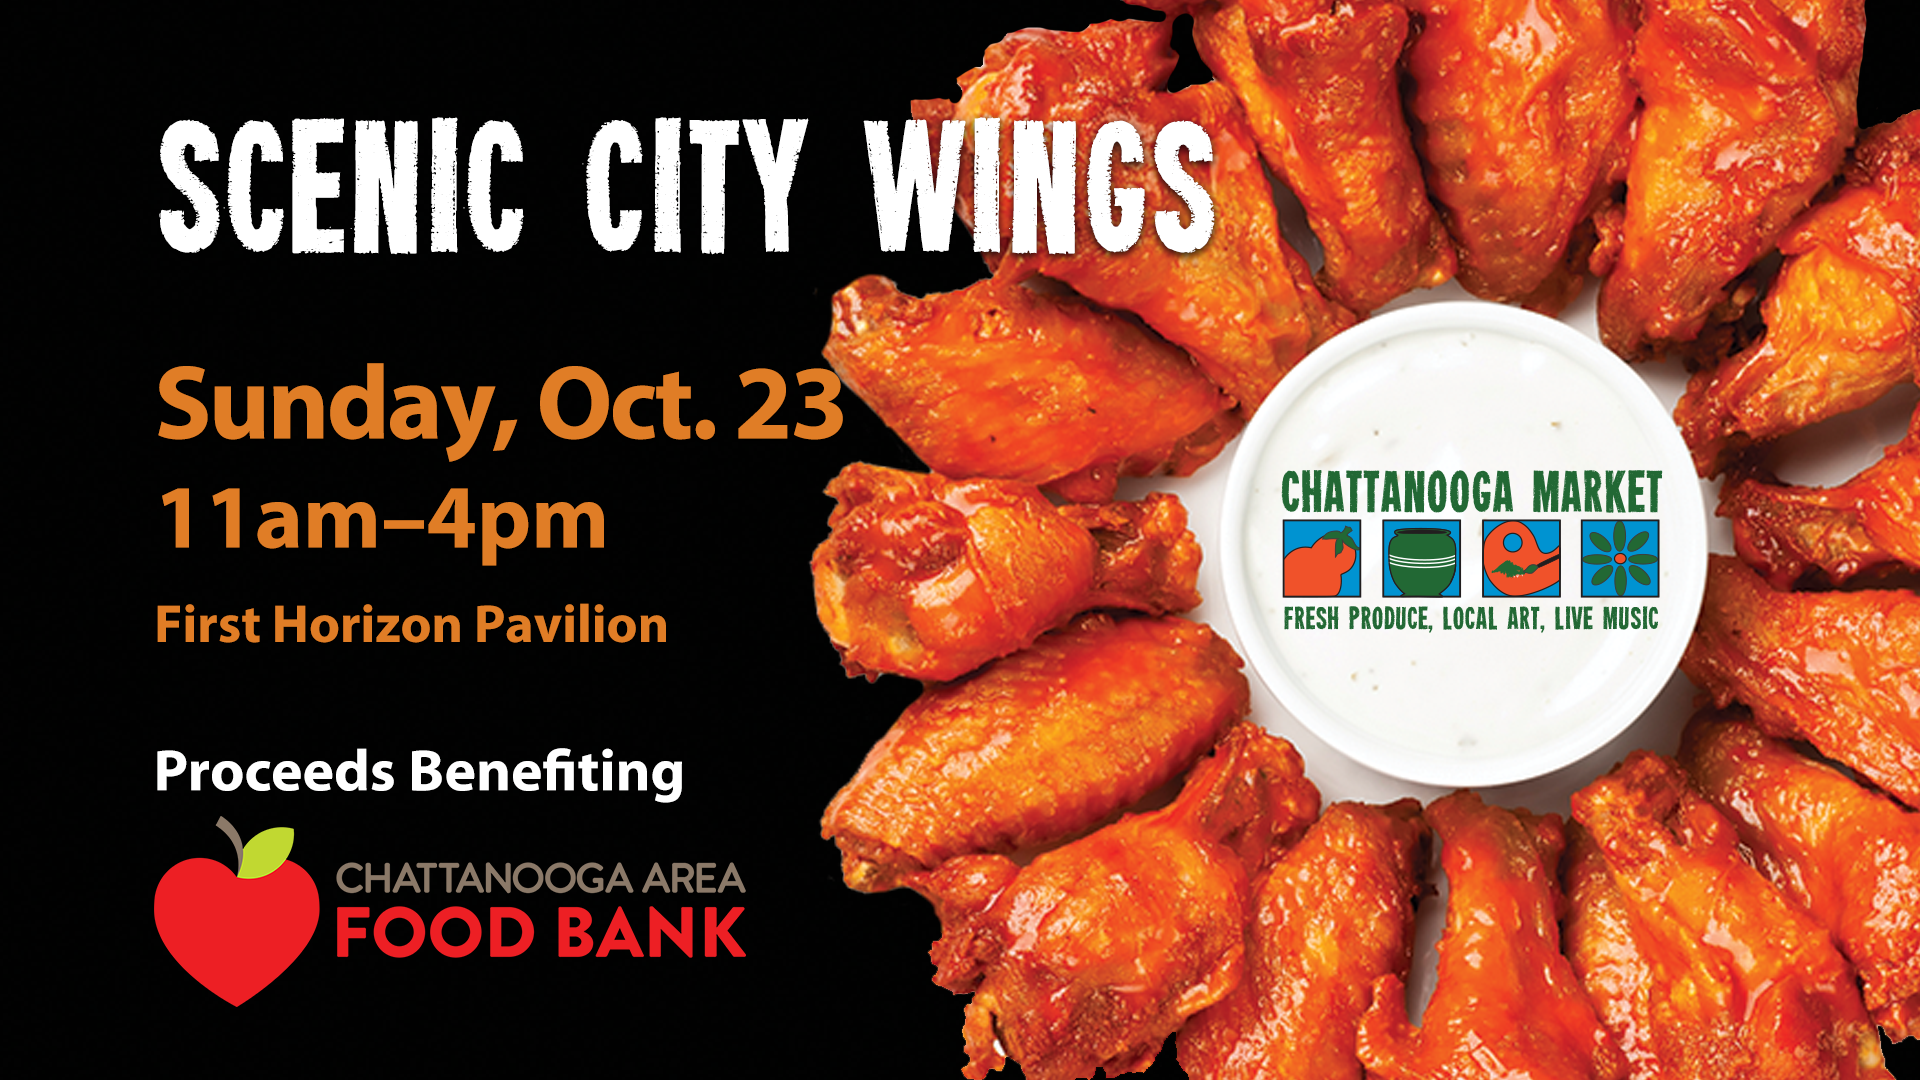 Scenic City Wings This Sunday, 10/23